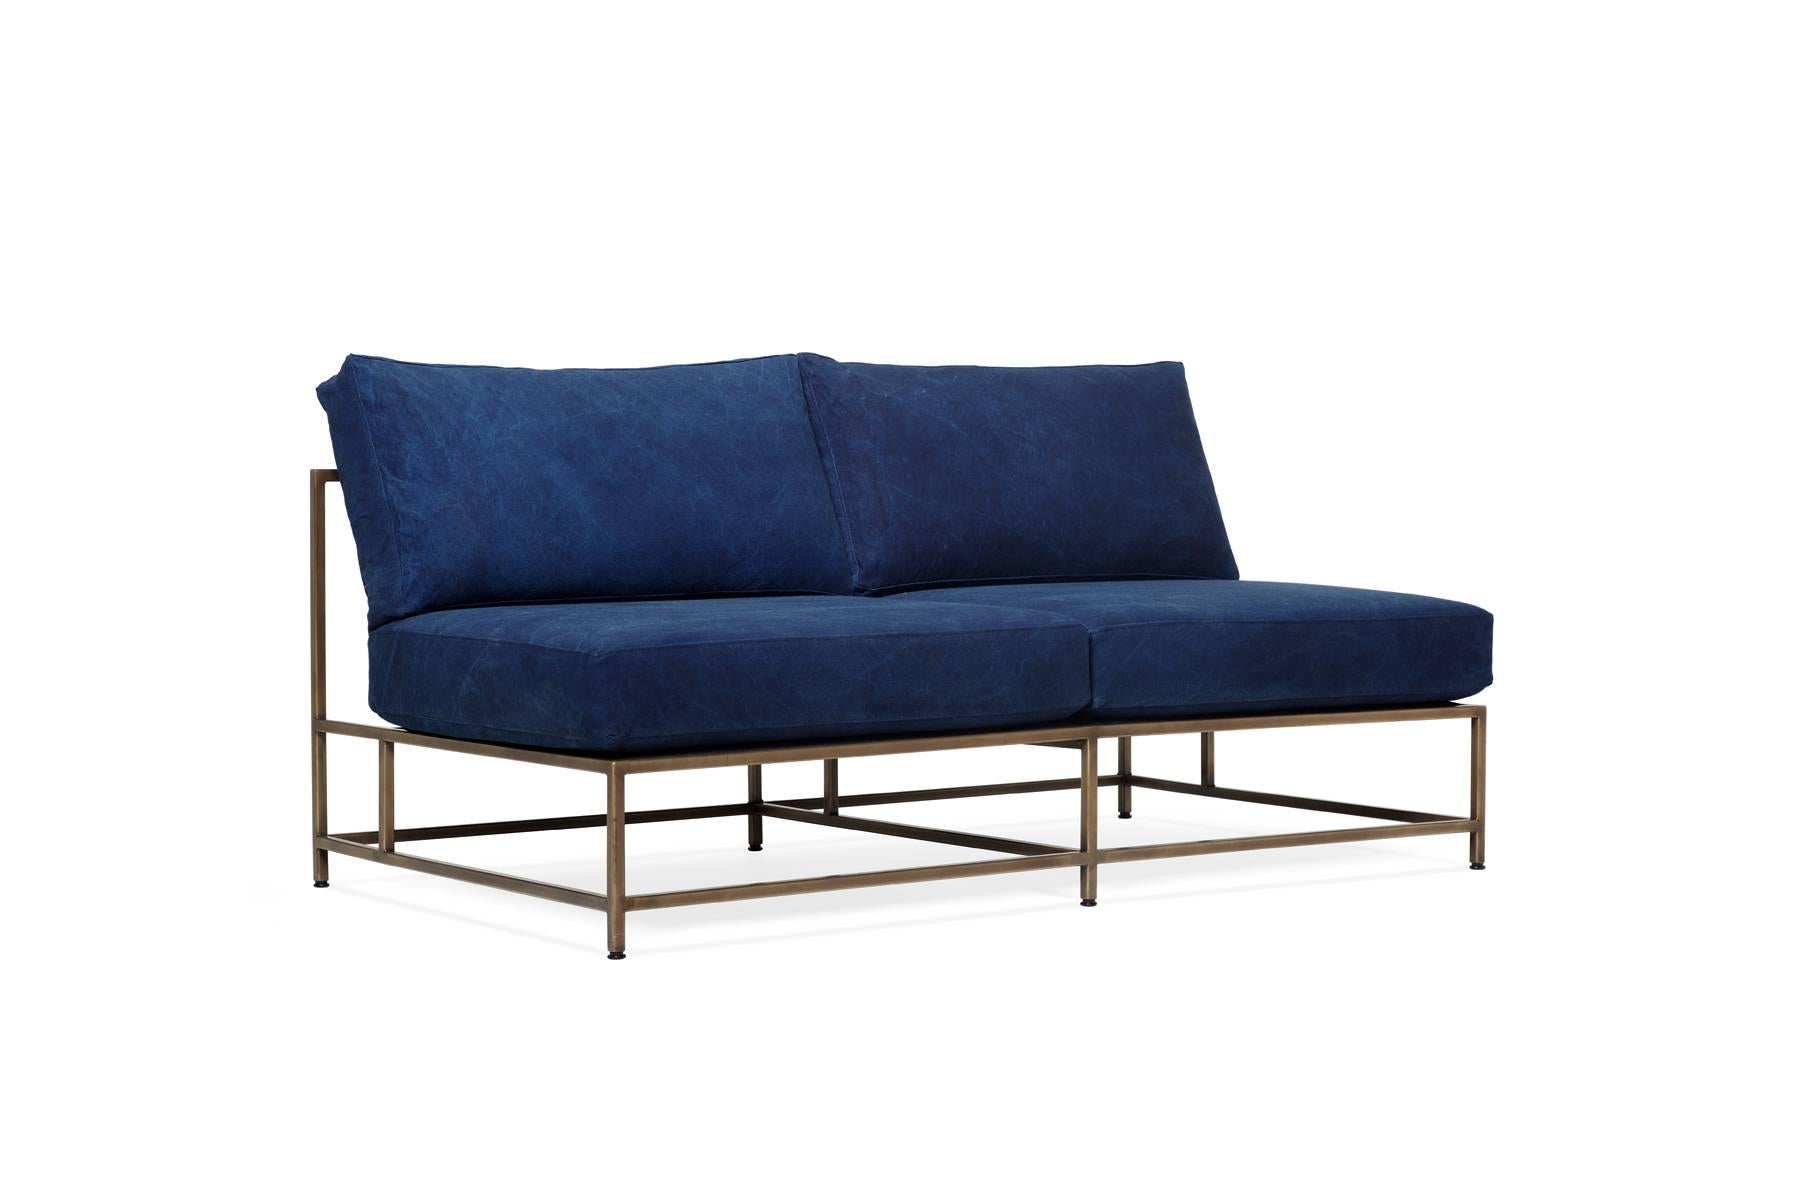 The Inheritance Loveseat by Stephen Kenn is as comfortable as it is unique. The design features an exposed construction composed of three elements - a steel frame, plush upholstery, and supportive belts. The deep seating area is perfect for a